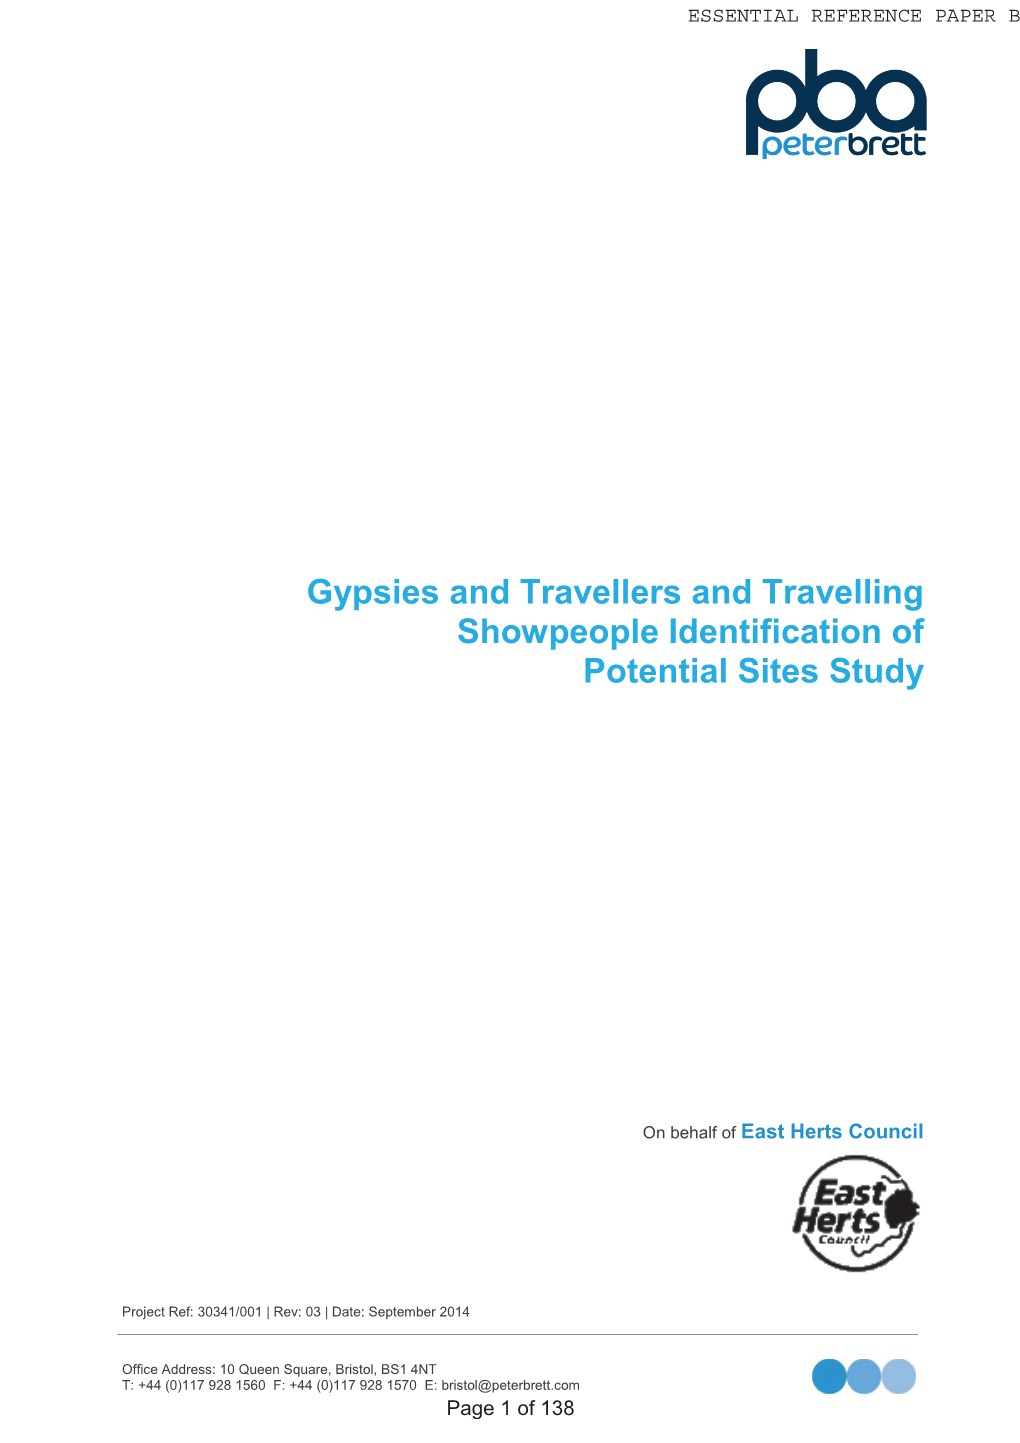 Gypsies and Travellers and Travelling Showpeople Identification of Potential Sites Study